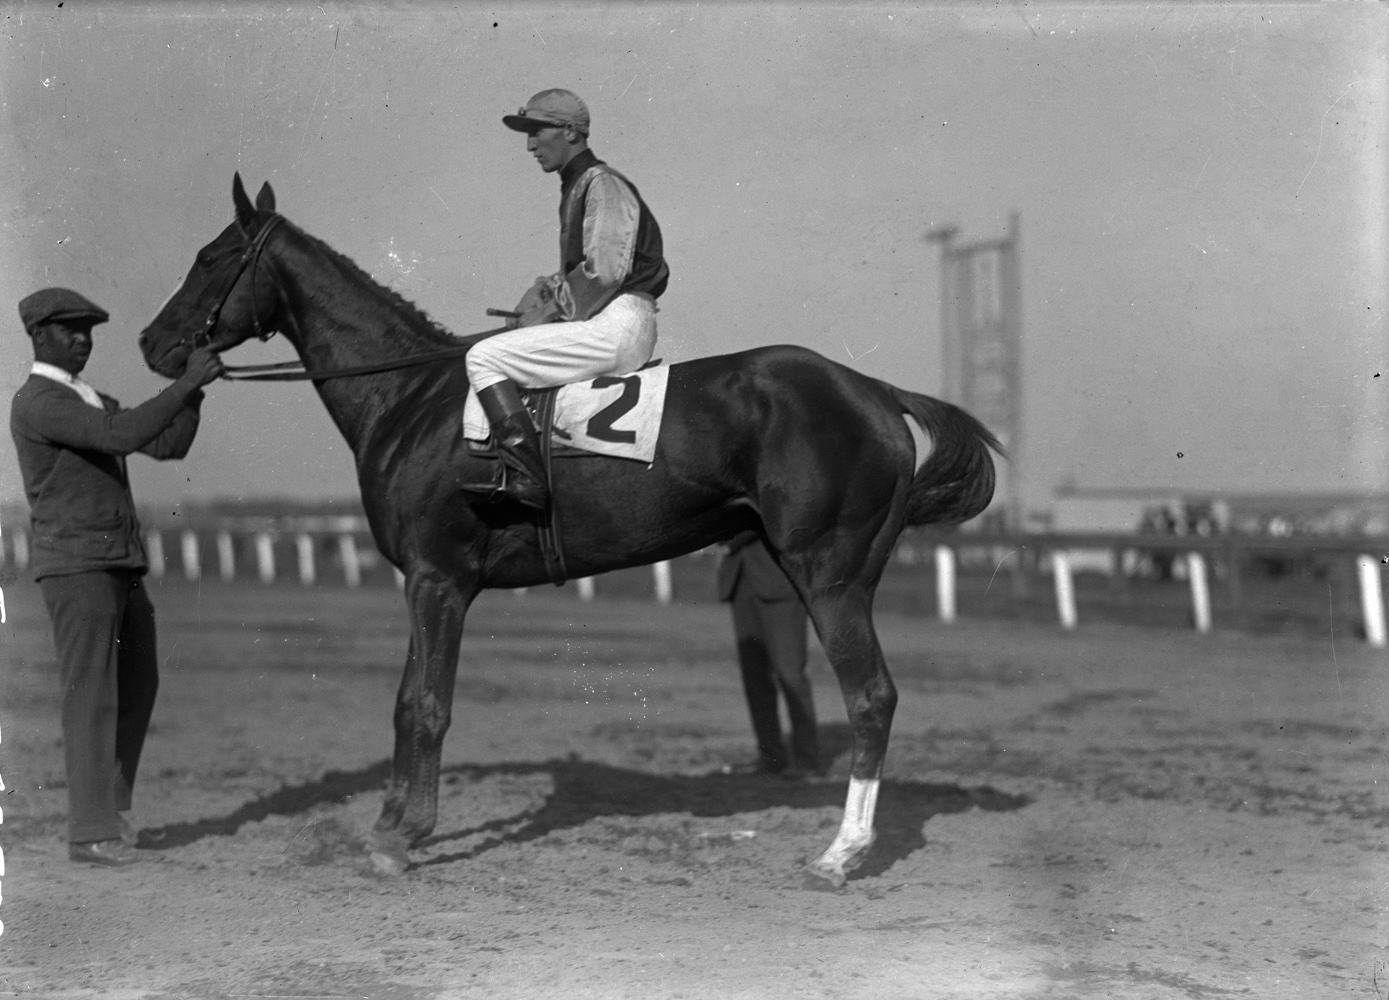 Sarazen with G. Babin up in 1924 (Keeneland Library Cook Collection)